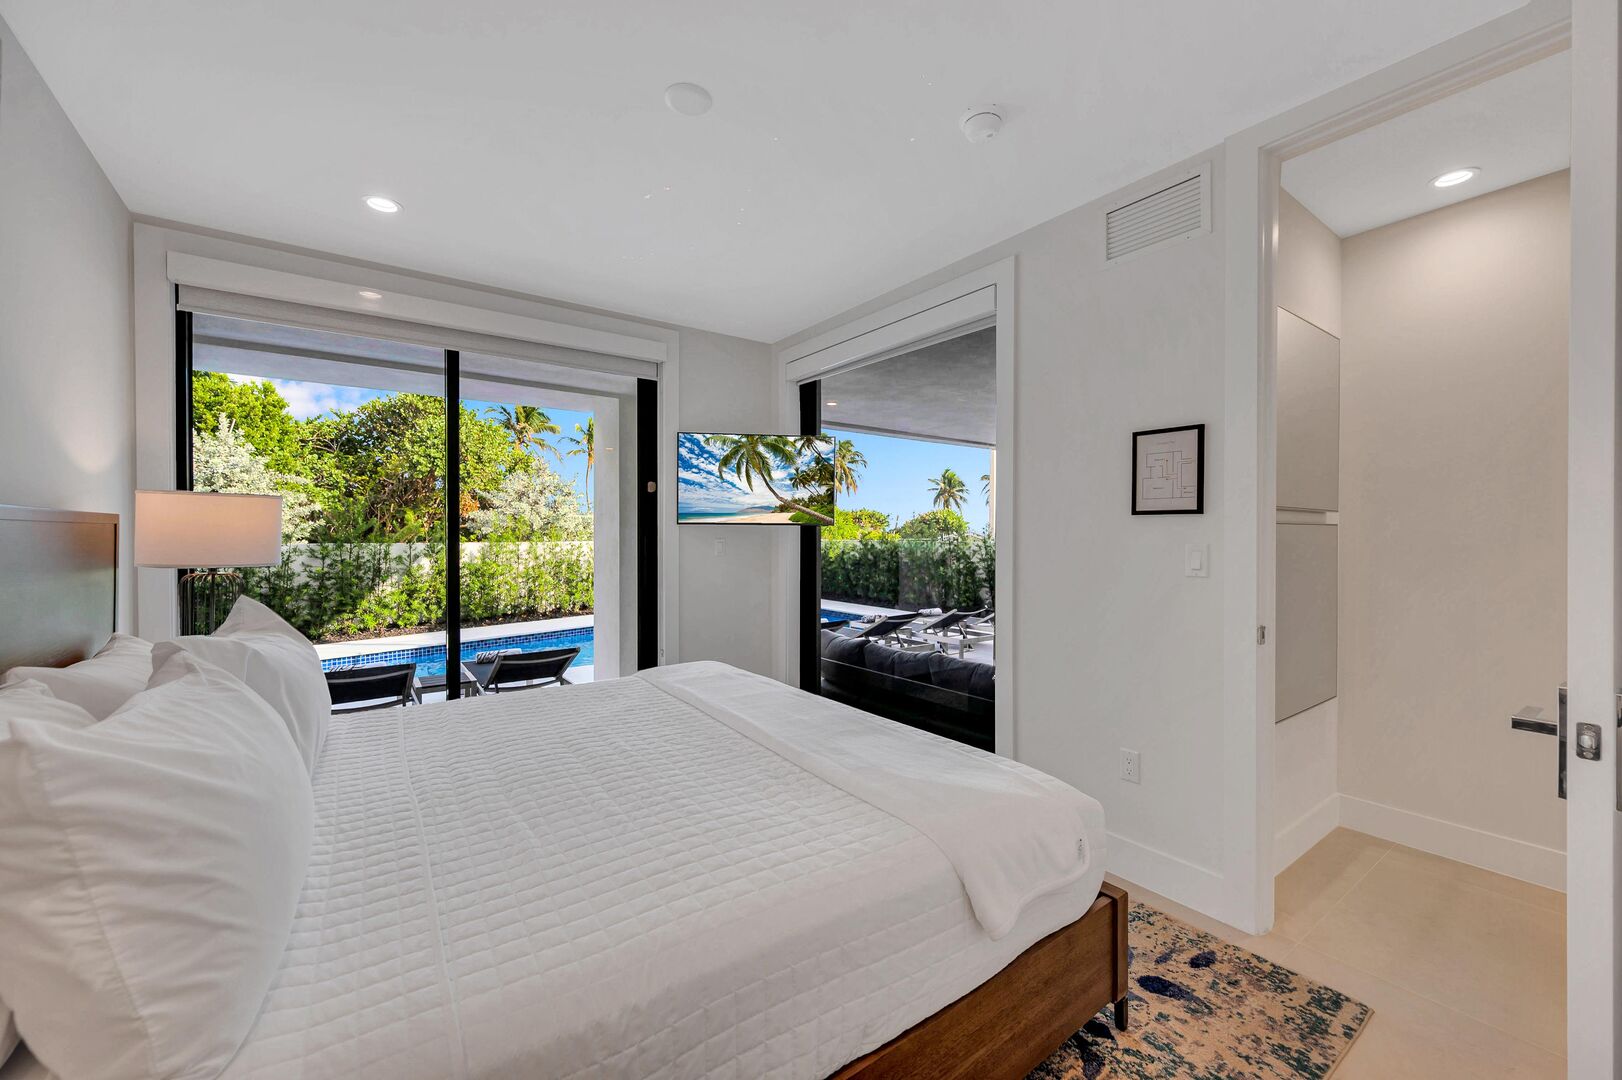 Bedroom Seven is located on the ground floor and boasts swimming pool views. Features a king size bed and ensuite bathroom.